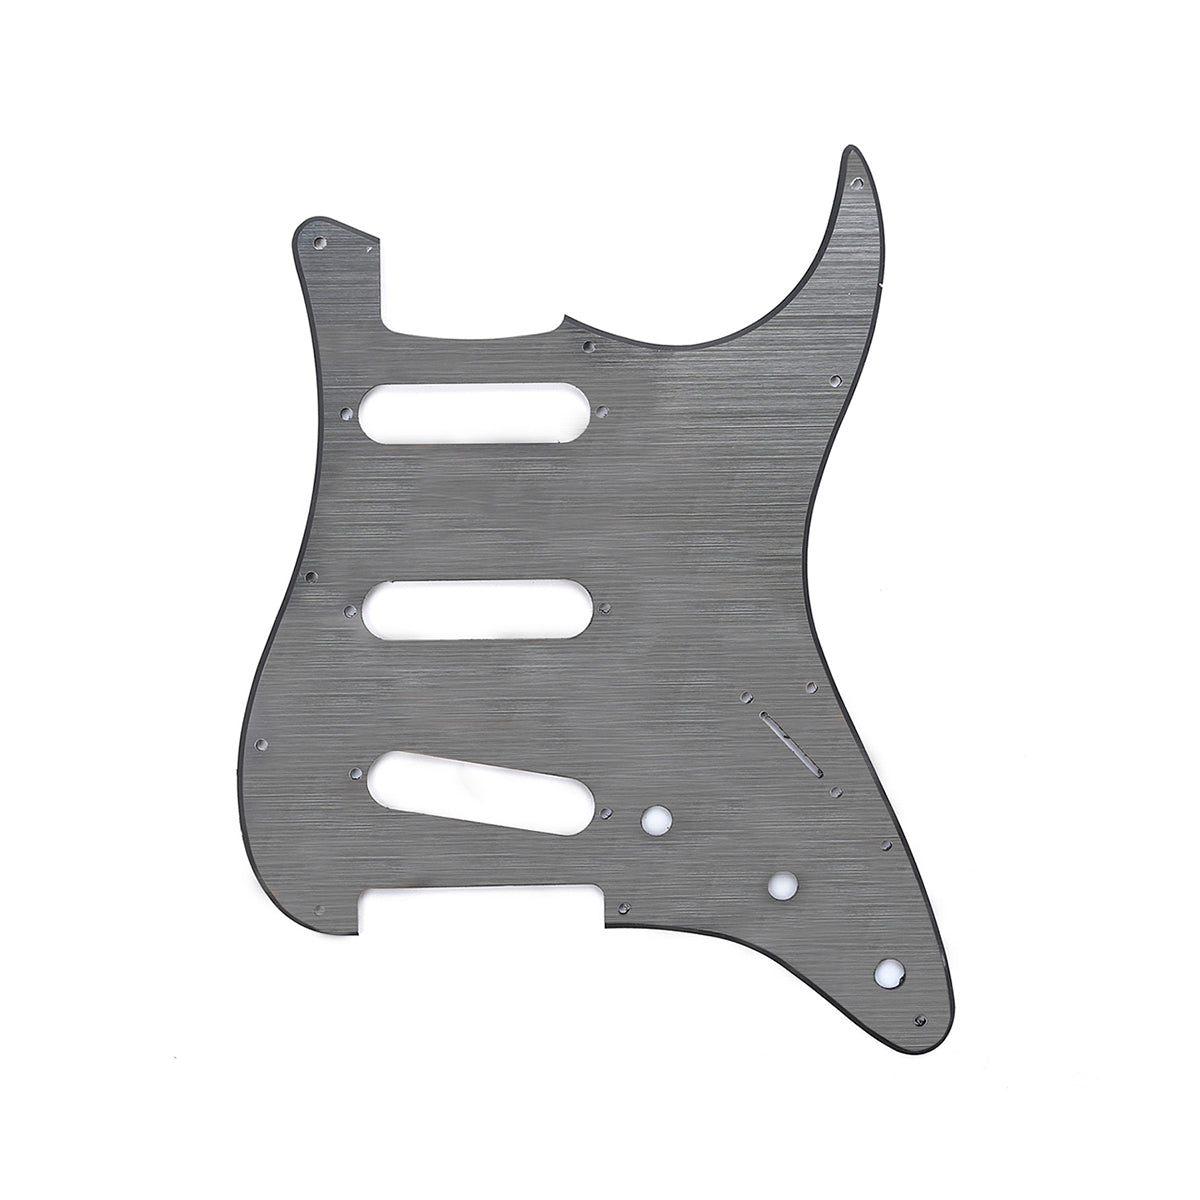 Musiclily SSS 11 Hole Strat Guitar Pickguard for Fender USA/Mexican Made Standard Stratocaster Modern Style, 2Ply Aluminum Surface